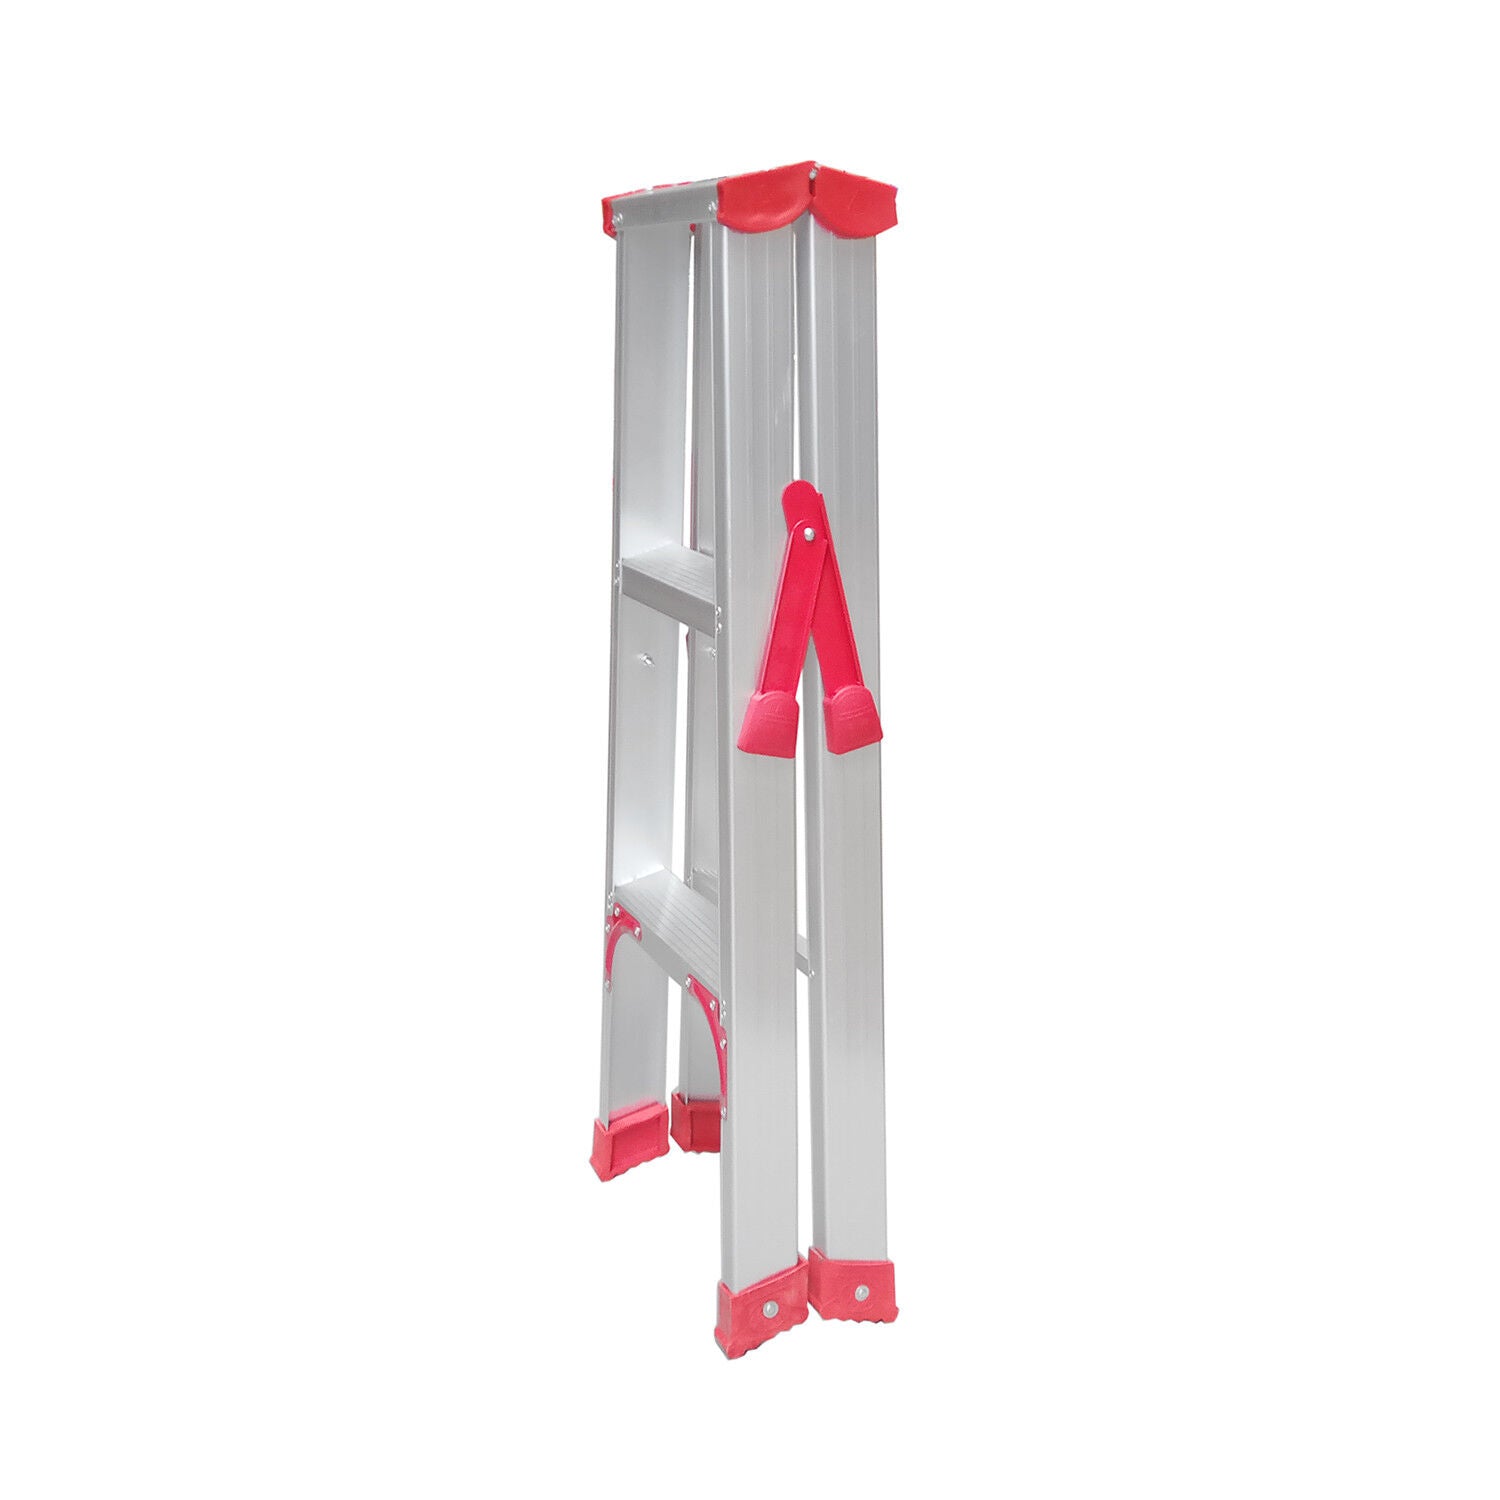 3 Step 88cm Double Sided Folding Ladder